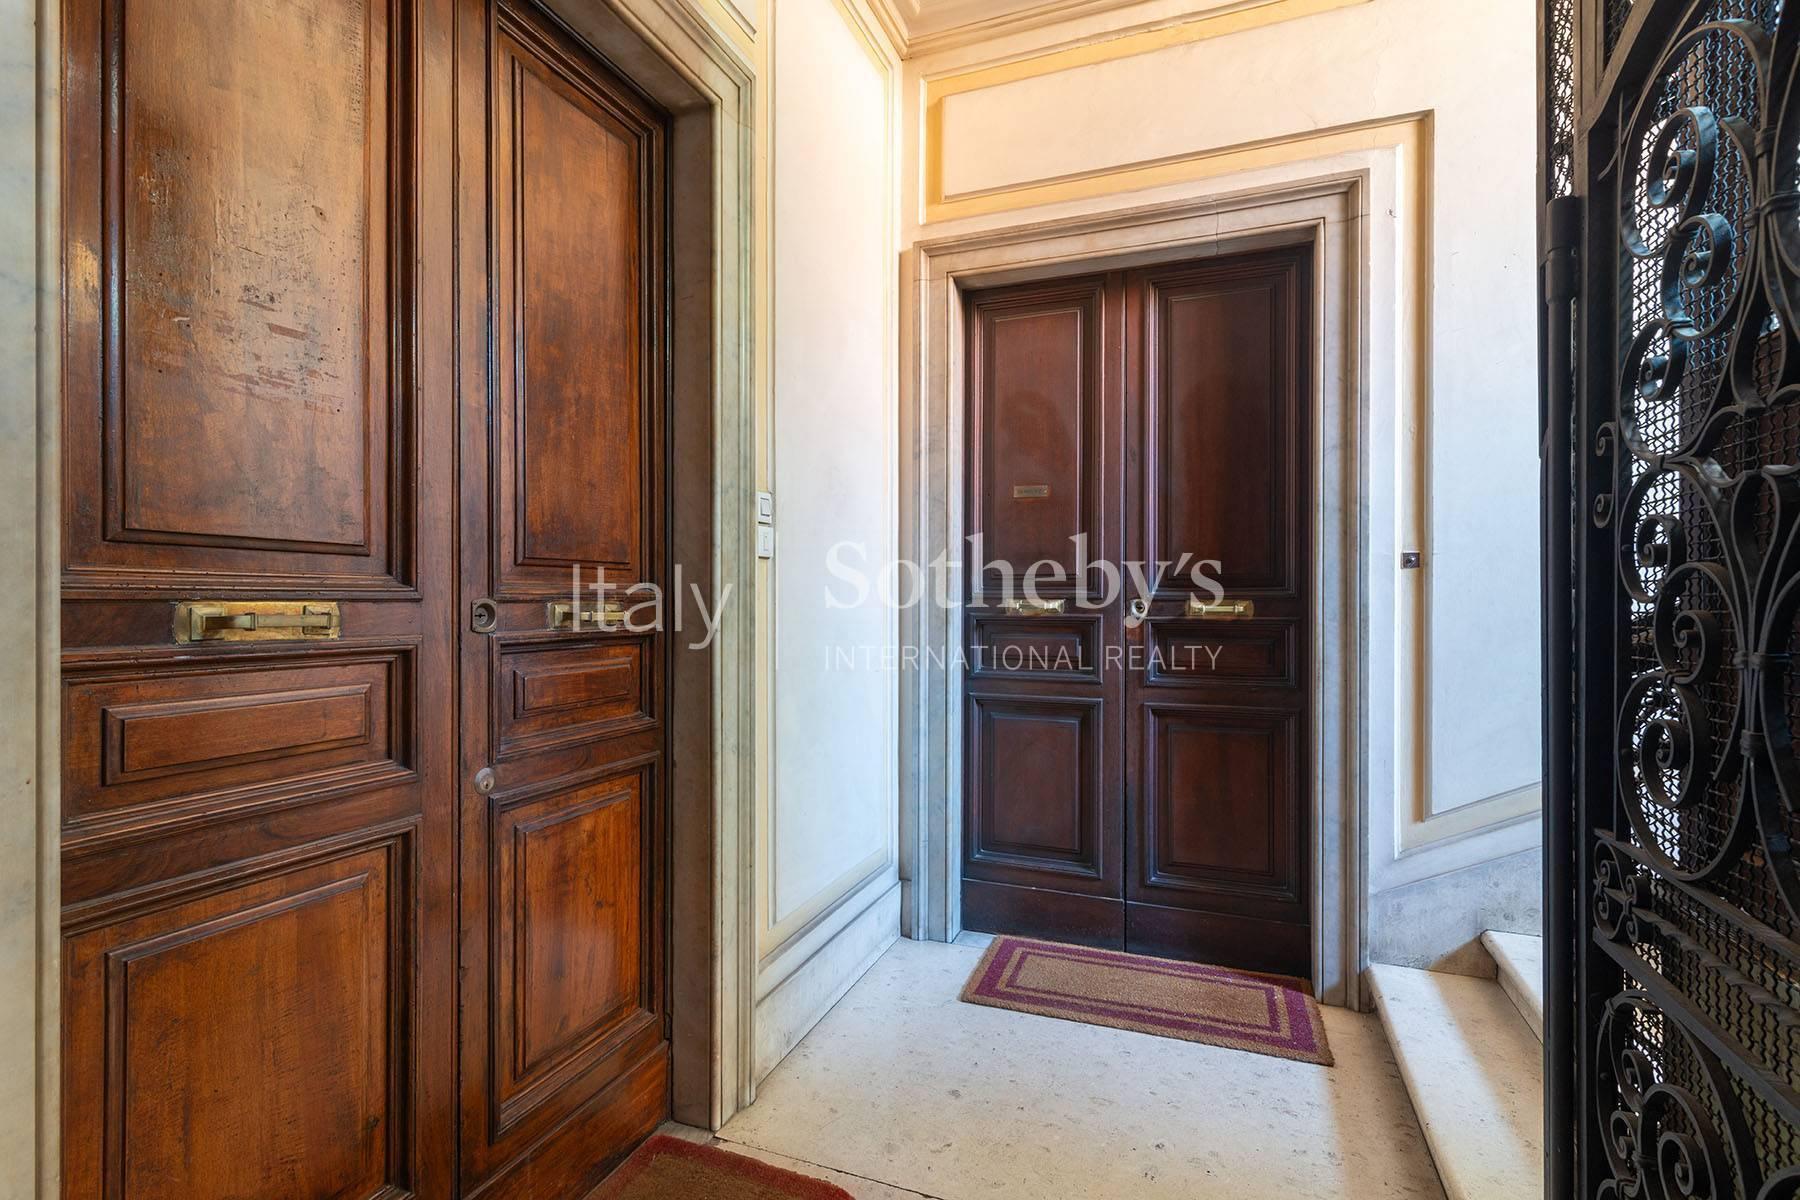 Elegant apartment with breathtaking views of the Tevere - 4